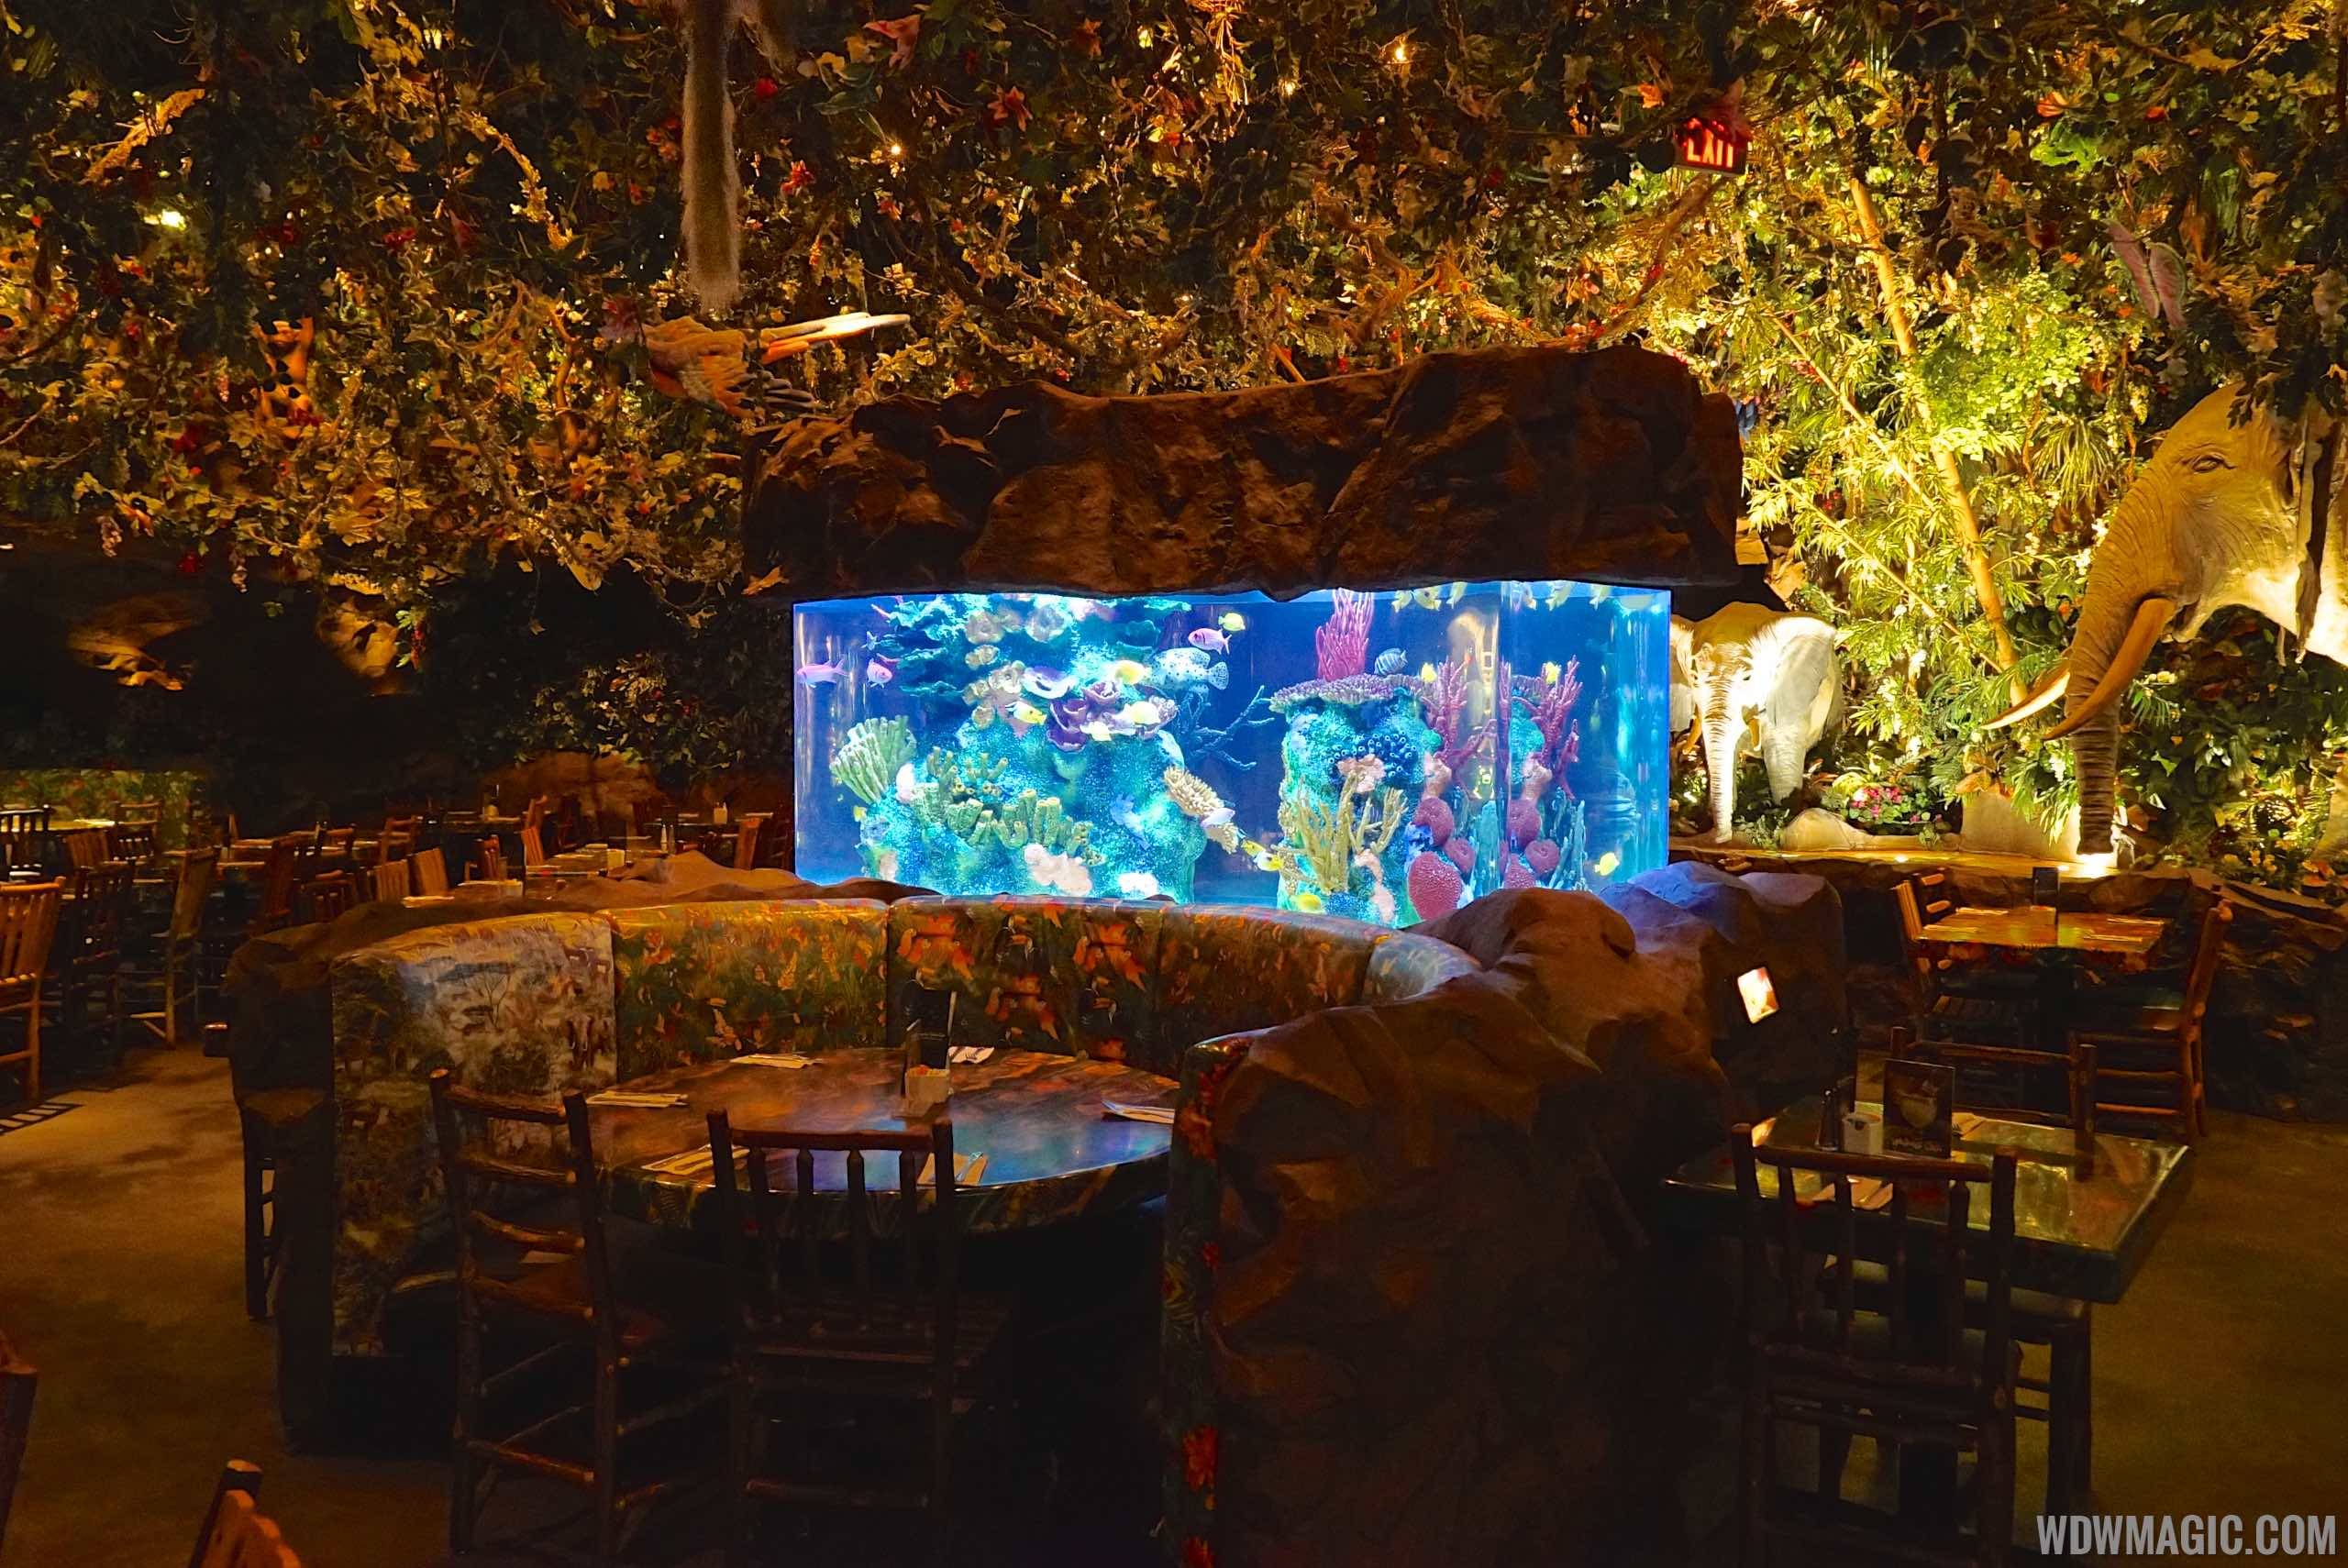 Half-price Rainforest Cafe gift cards available today